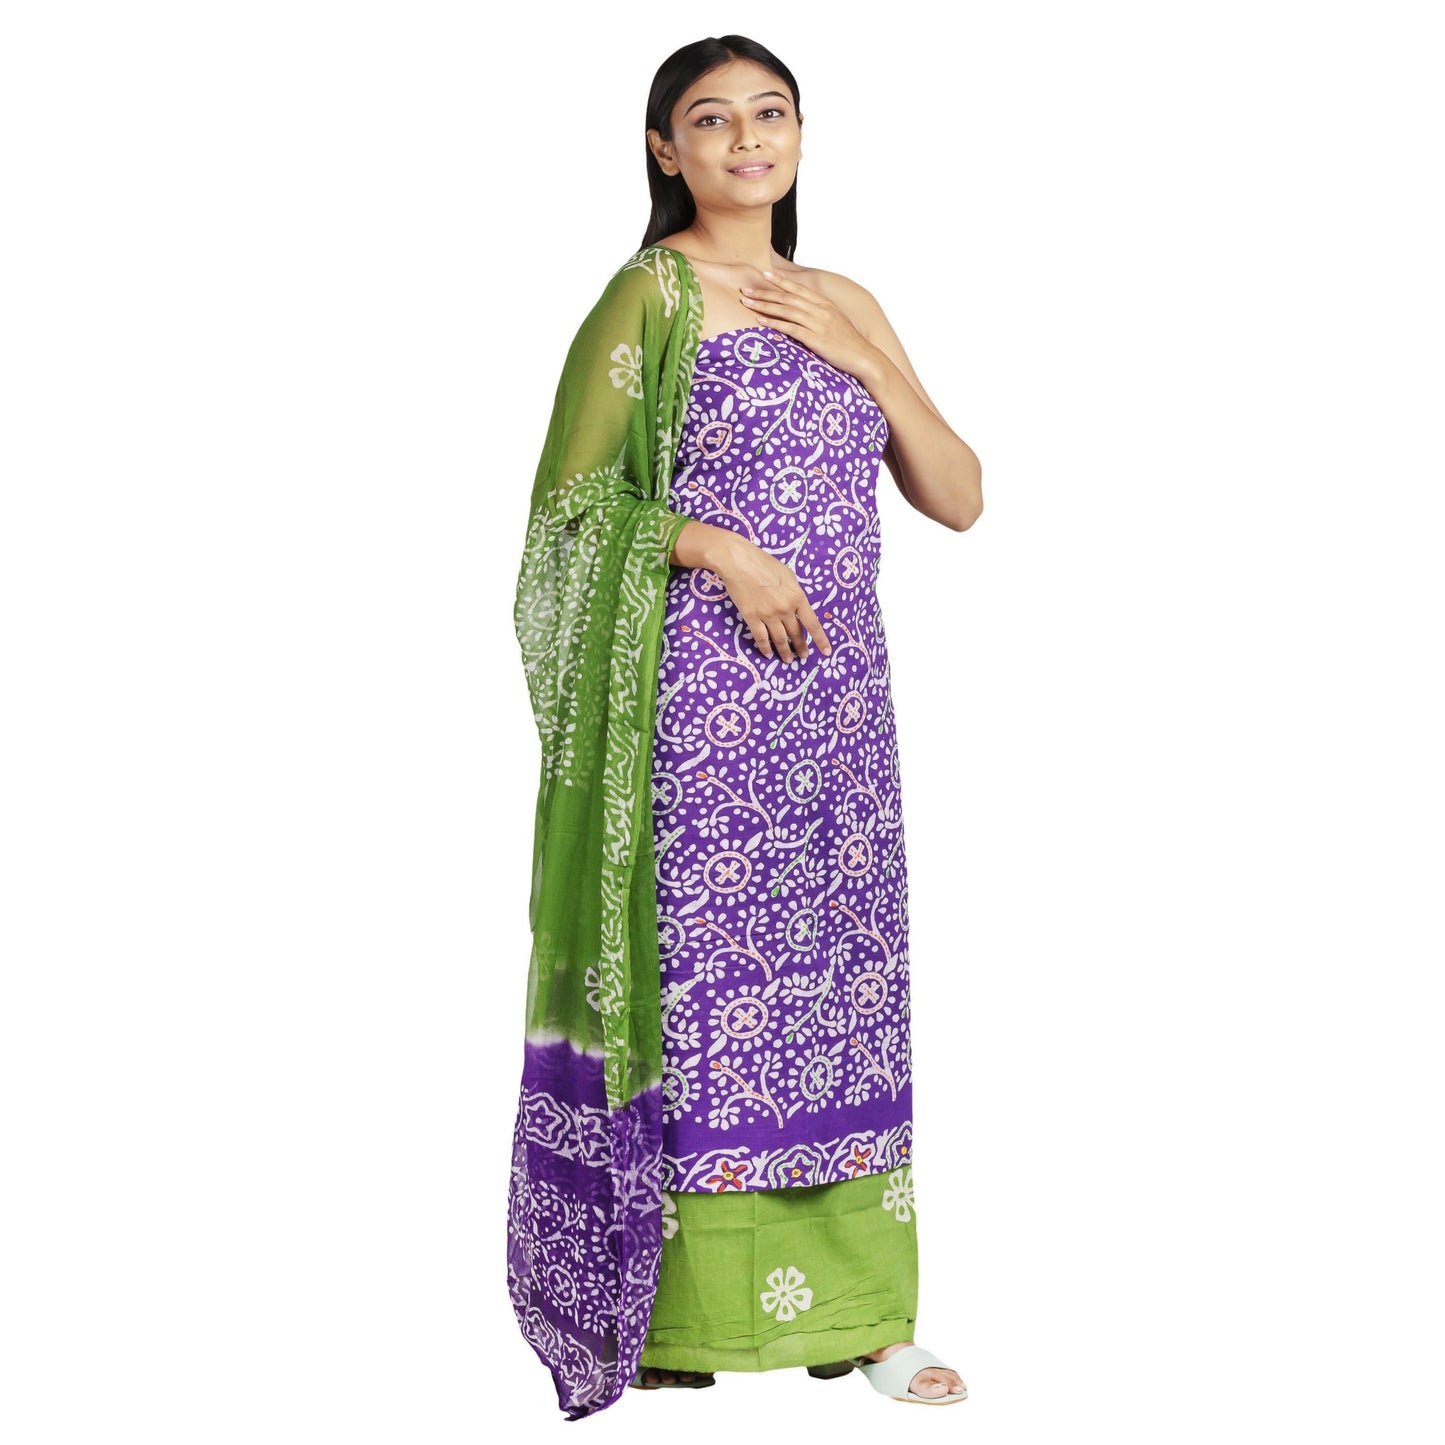 purple cotton top with embroidery and white print , green bottom with white print, chiffon dupatta in green and purple